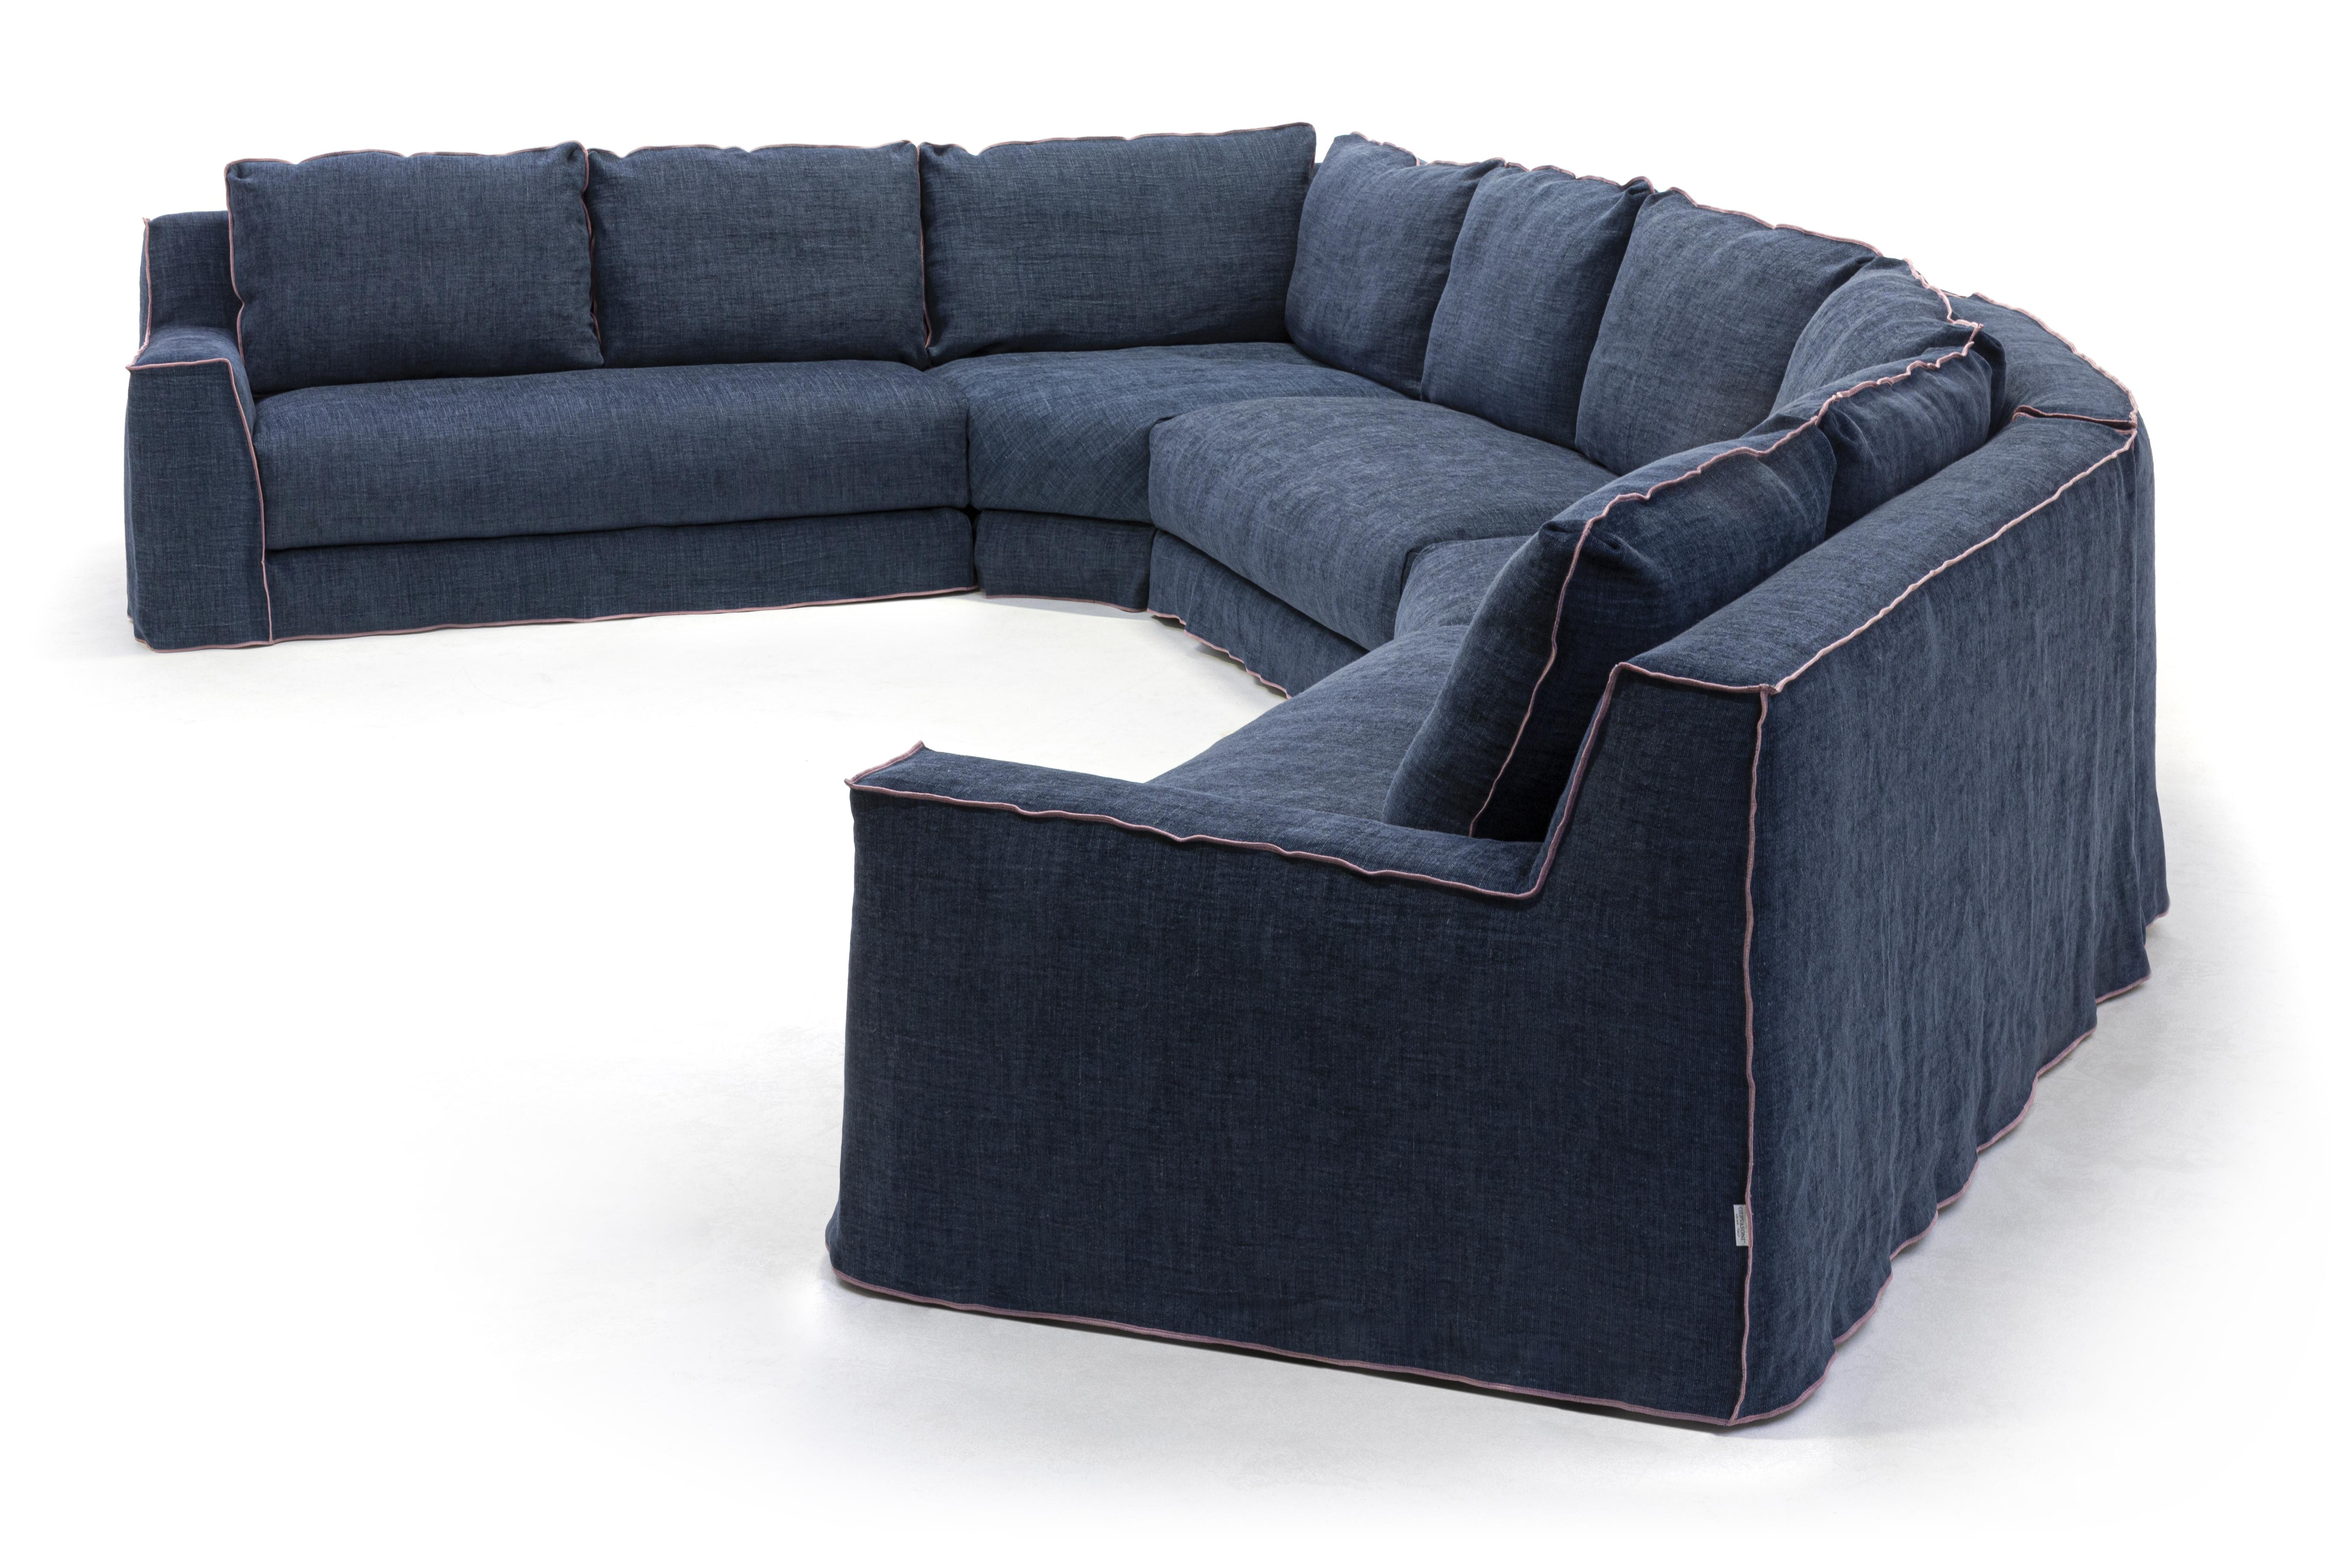 Italian Gervasoni Loll 11 Modular Sofa in Munch Upholstery by Paola Navone For Sale